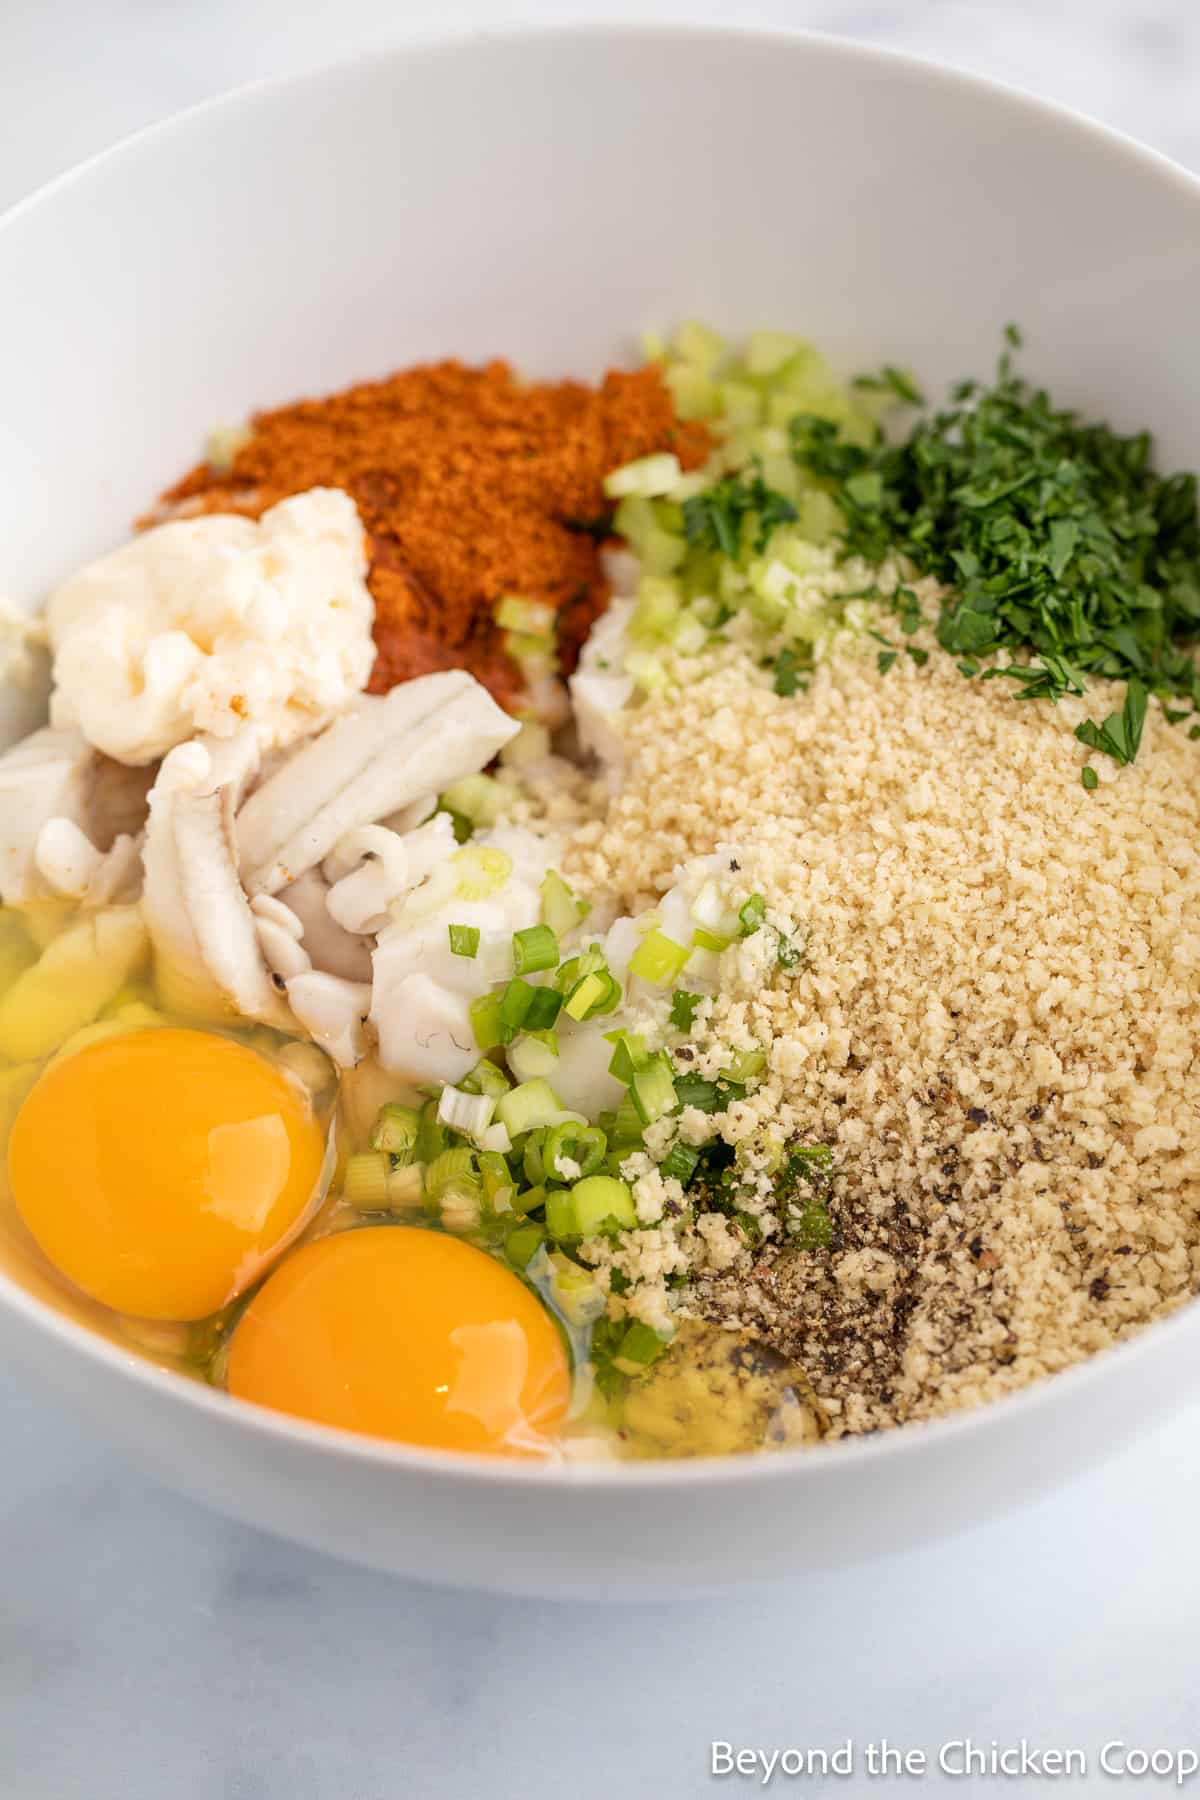 A bowl filled with white fish, eggs, bread crumbs and seasoning.